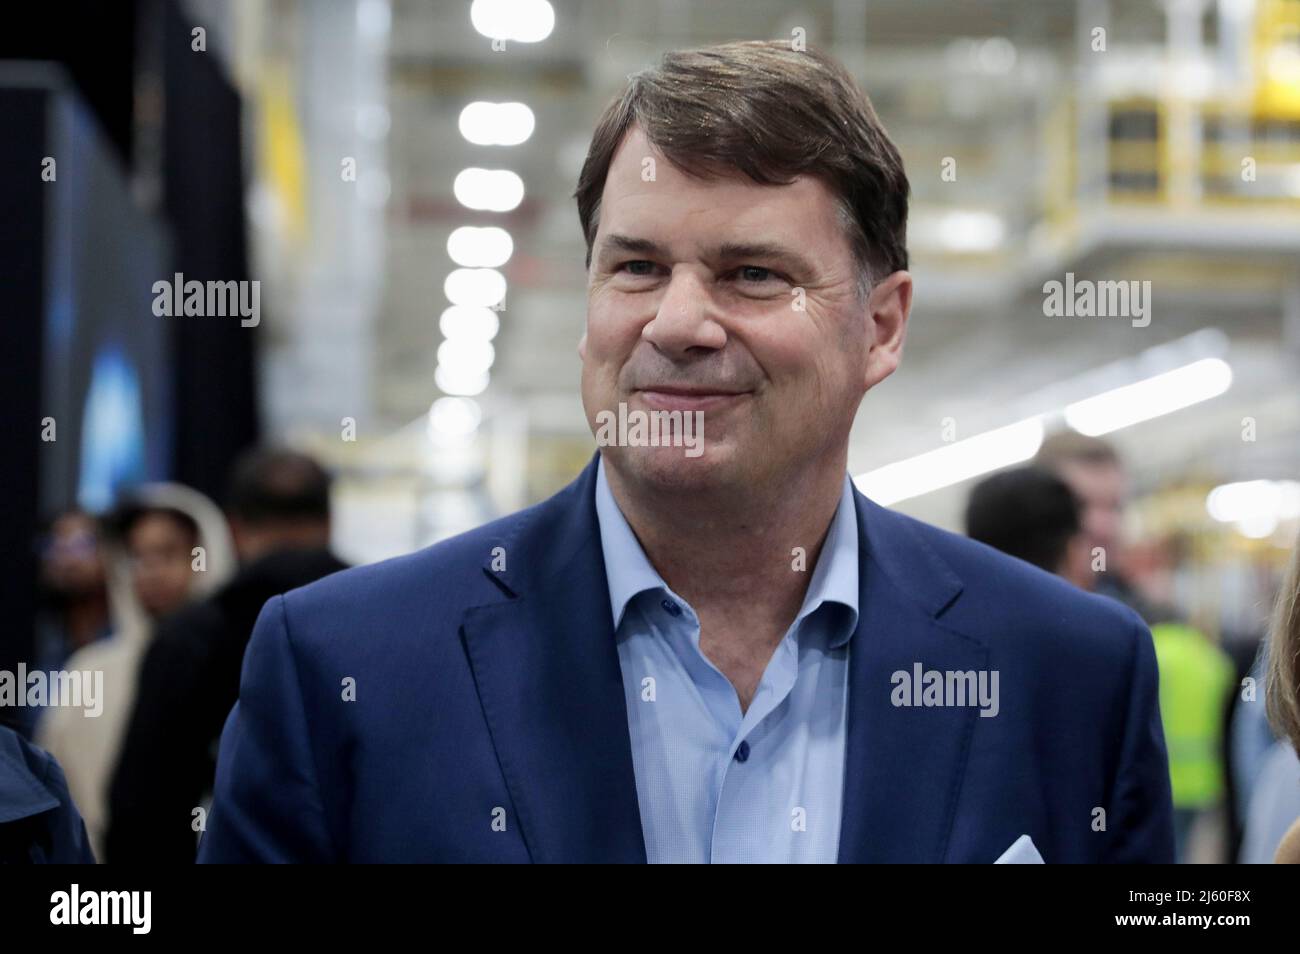 Ford CEO Jim Farley attends the official launch of the all-new Ford F-150 Lightning electric pickup truck at the Ford Rouge Electric Vehicle Center in Dearborn, Michigan, U.S. April 26, 2022. REUTERS/Rebecca Cook Stock Photo